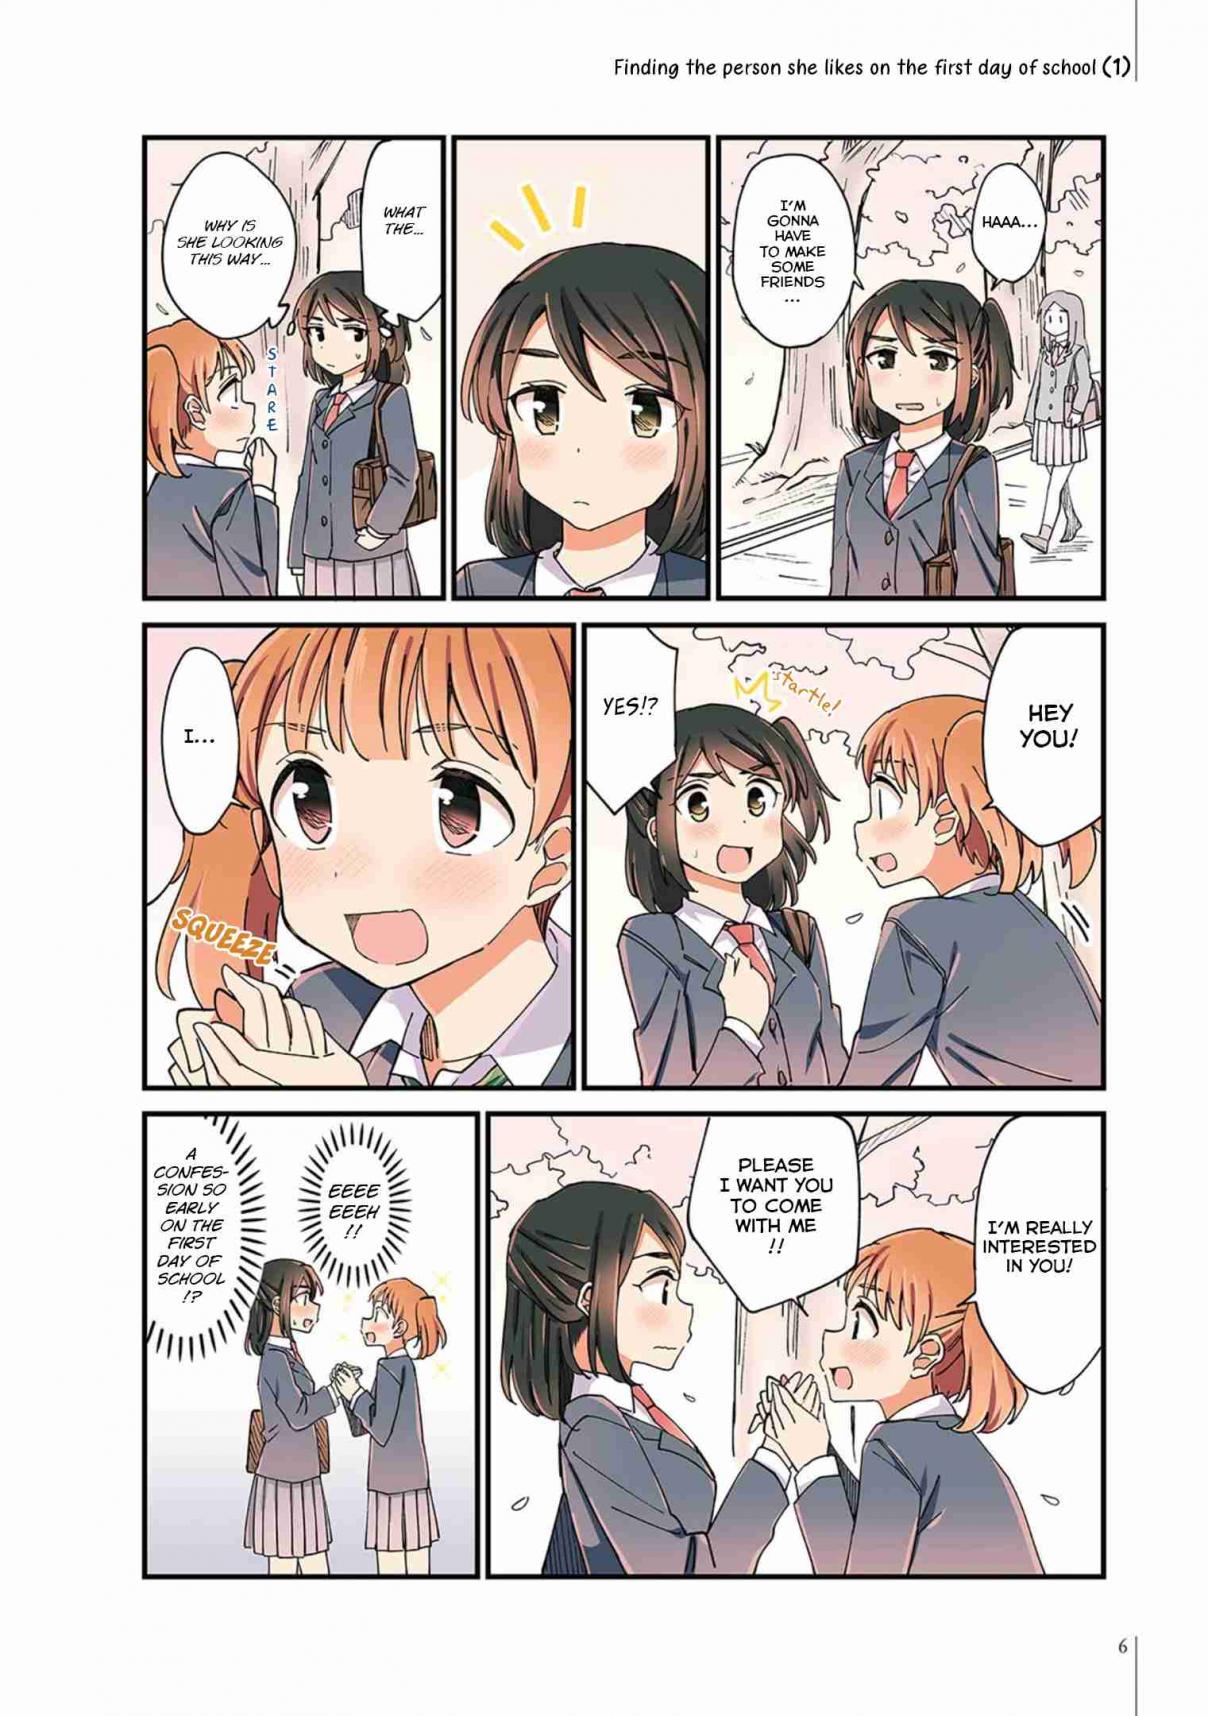 A Hundred Scenes of Girls Love Vol. 2 Ch. 7 April